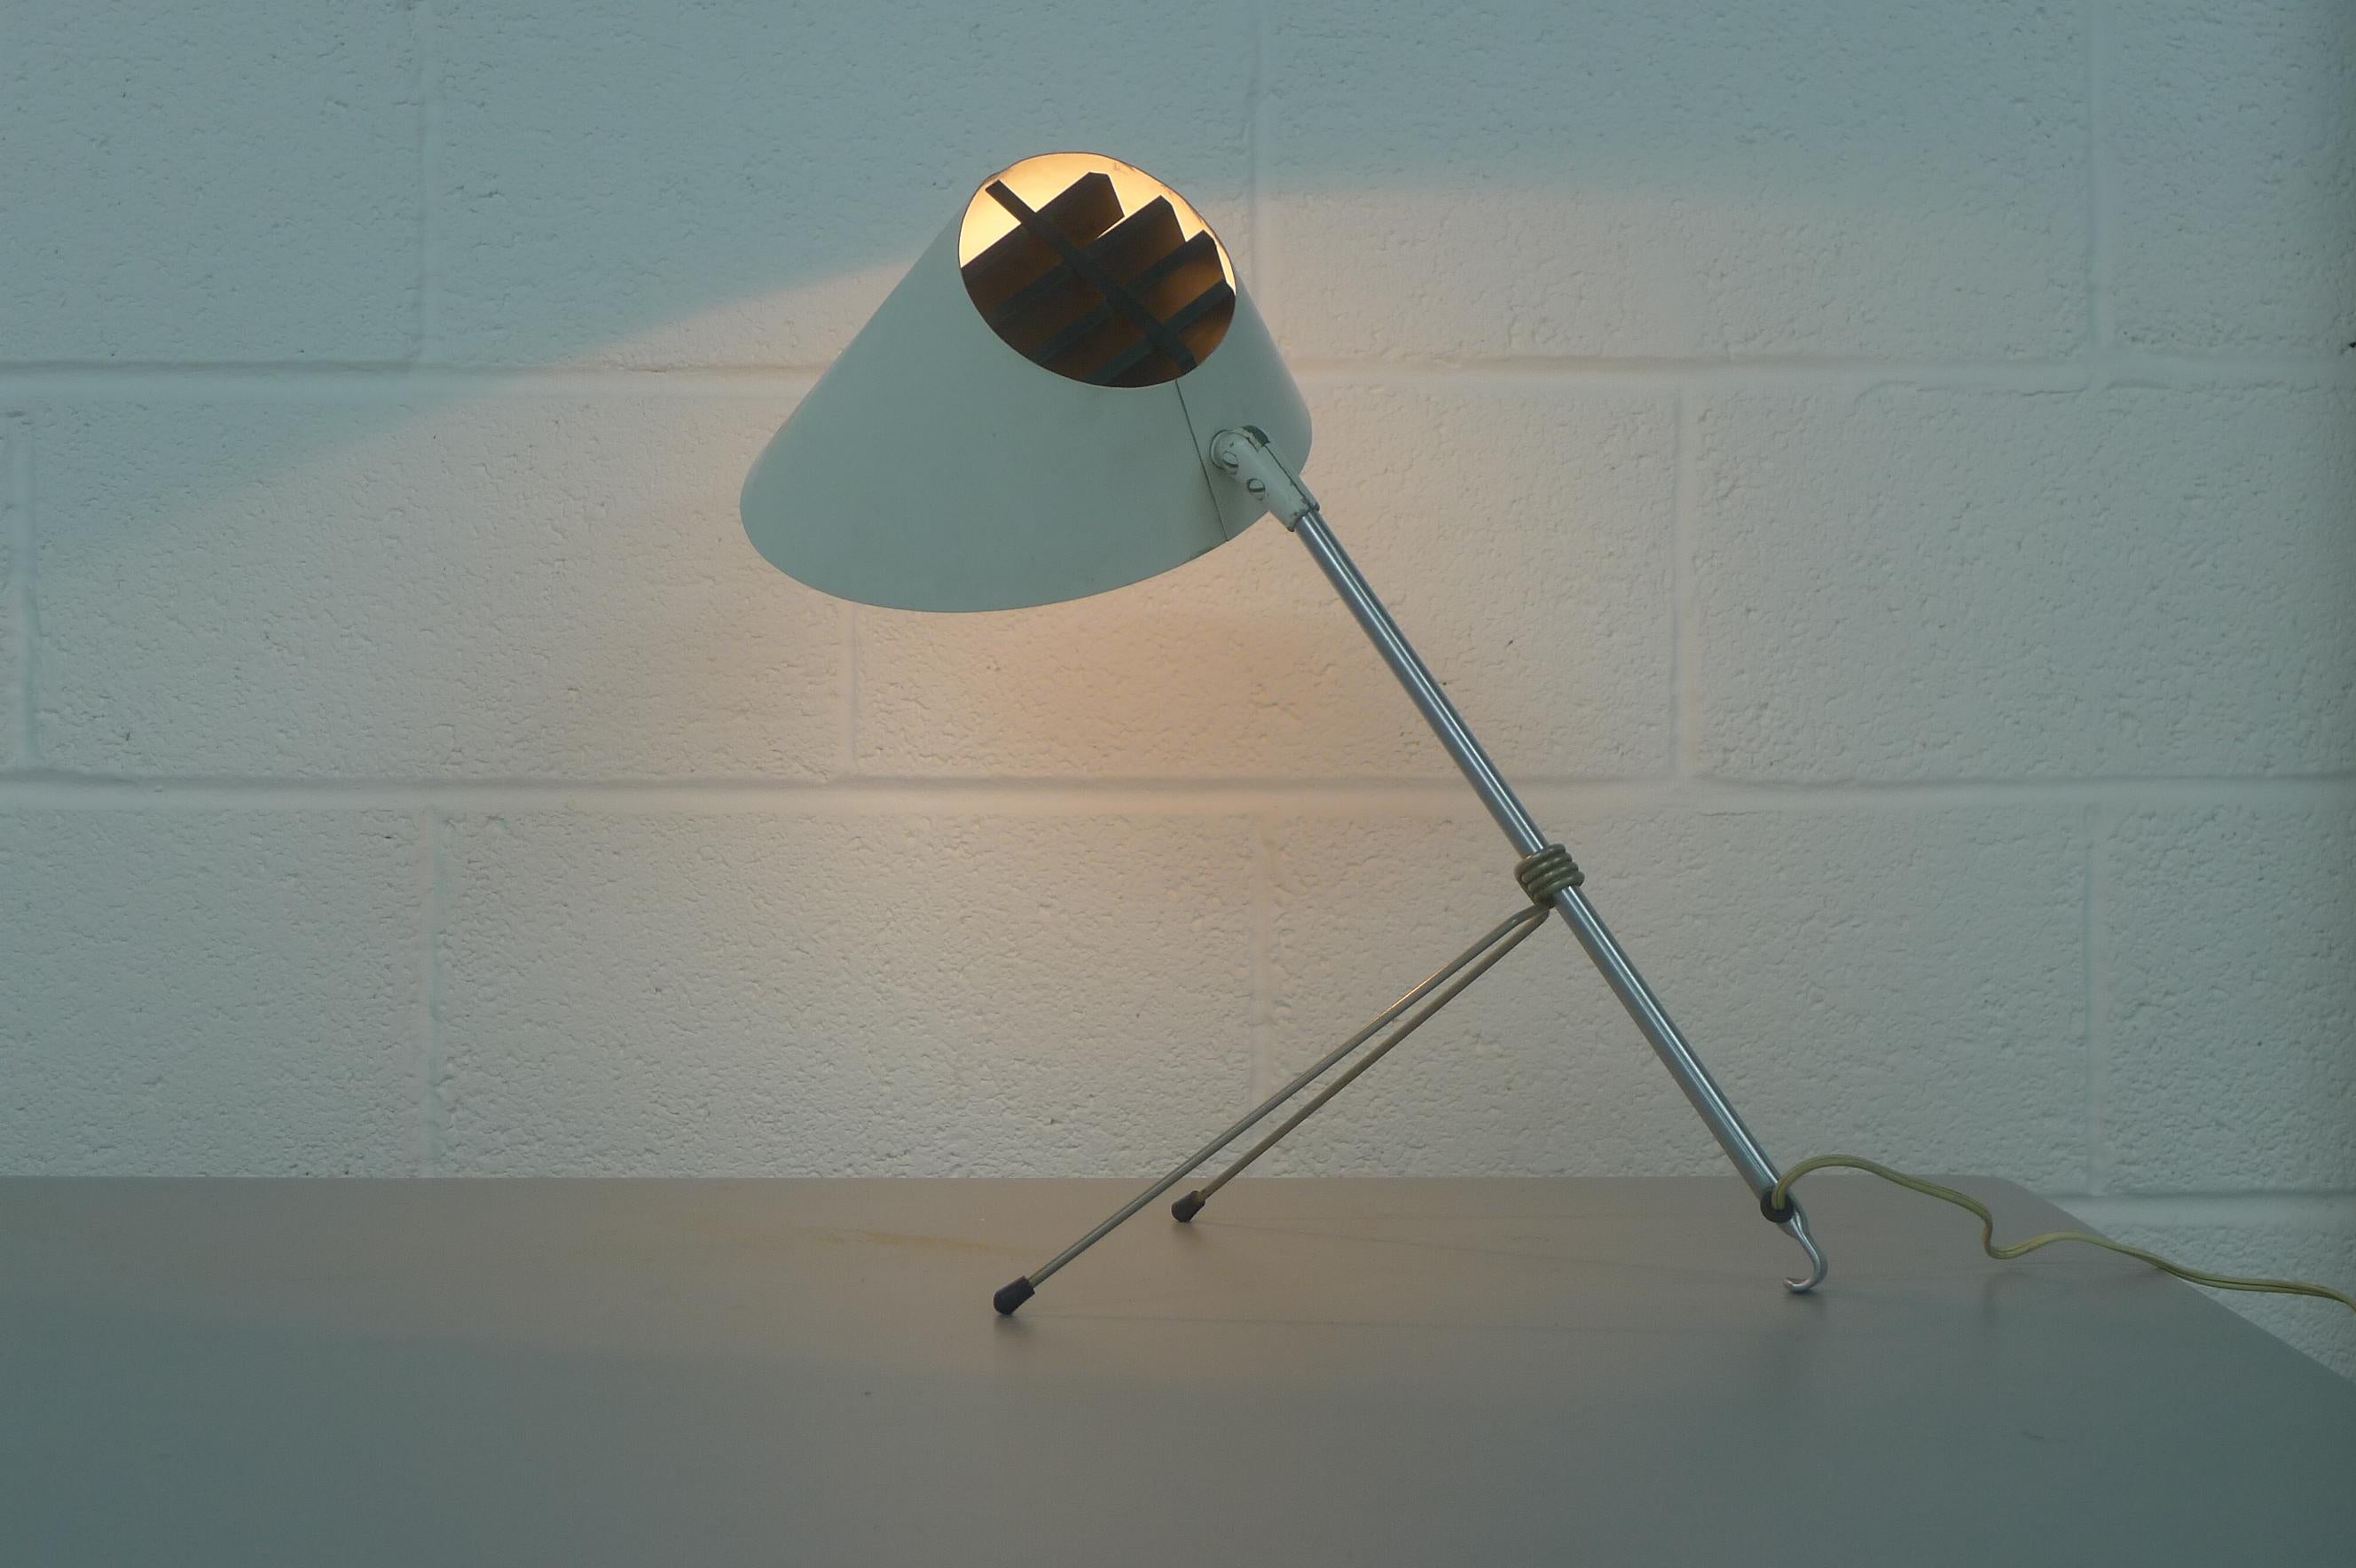 Anthony Ingolia table or wall lamp for thre Heifetz Manufacturing Co. USA circa 1951. Steel , nickel aluminum and enamel construction. Articulating and pivoting shade, height adjustable by moving the legs along the stem.
Produced as a result of a